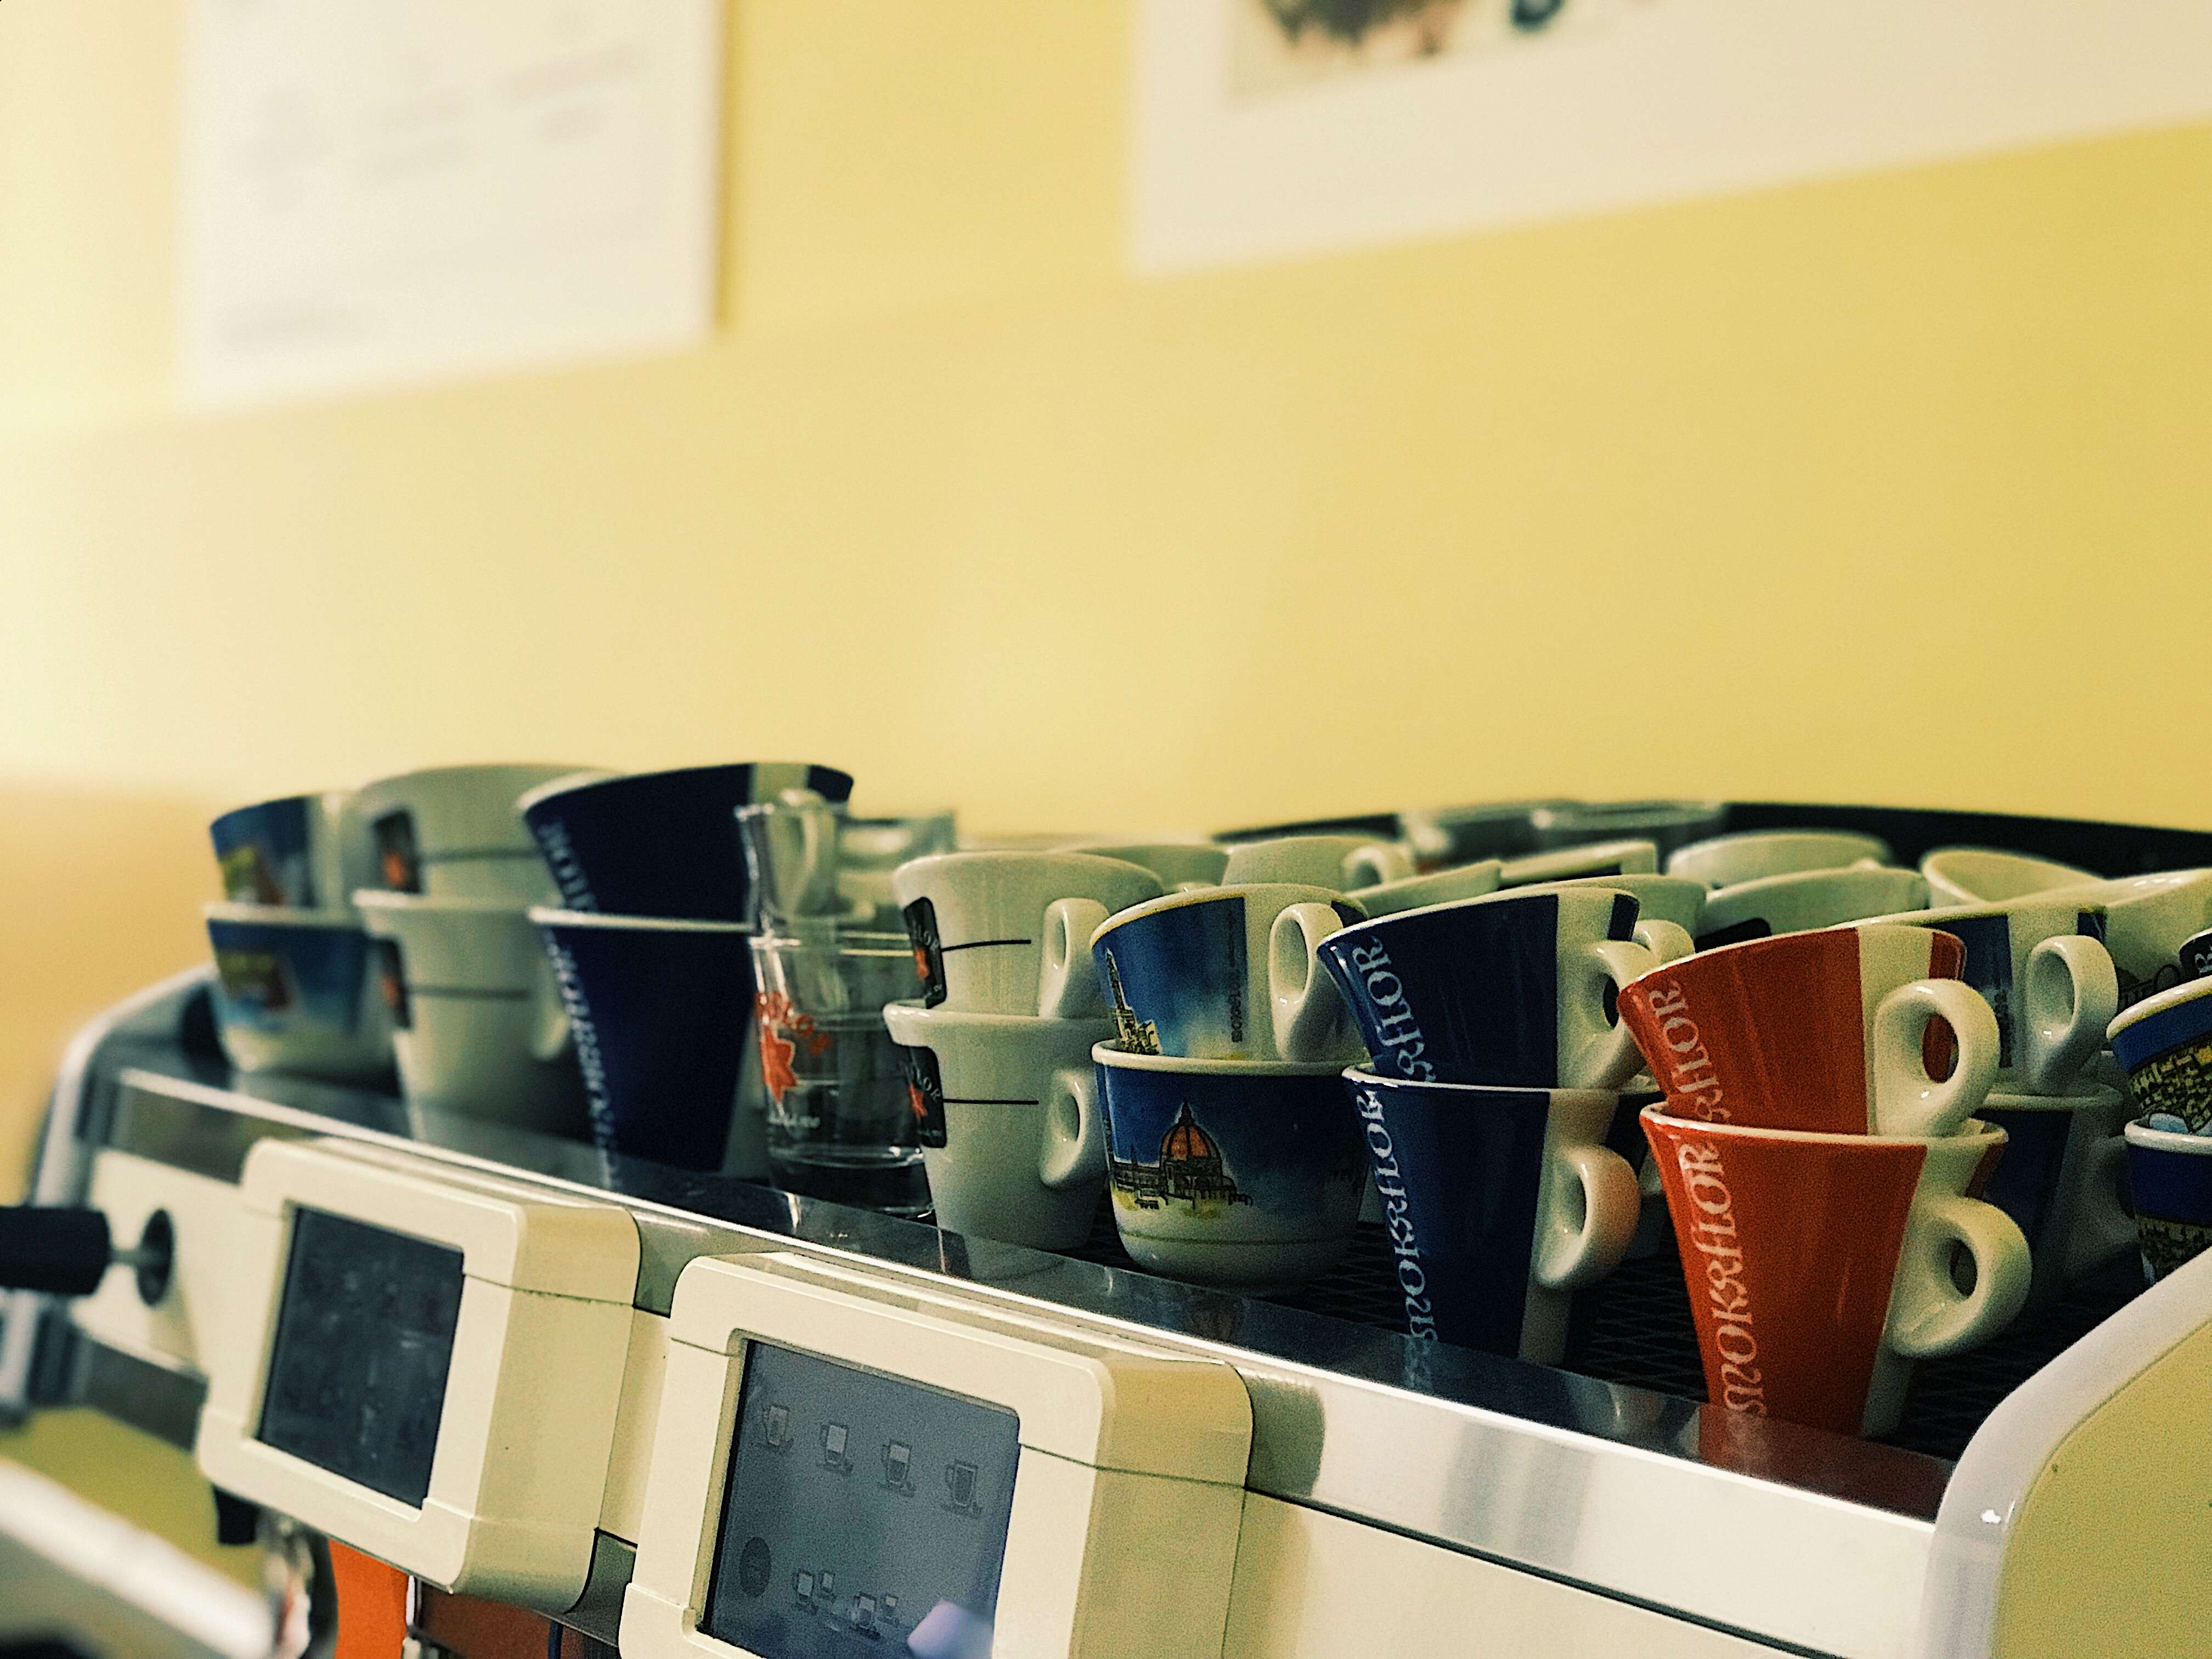 CUPS: how should be placed on the cup warmer of the machine? - Torrefazione Mokaflor Firenze